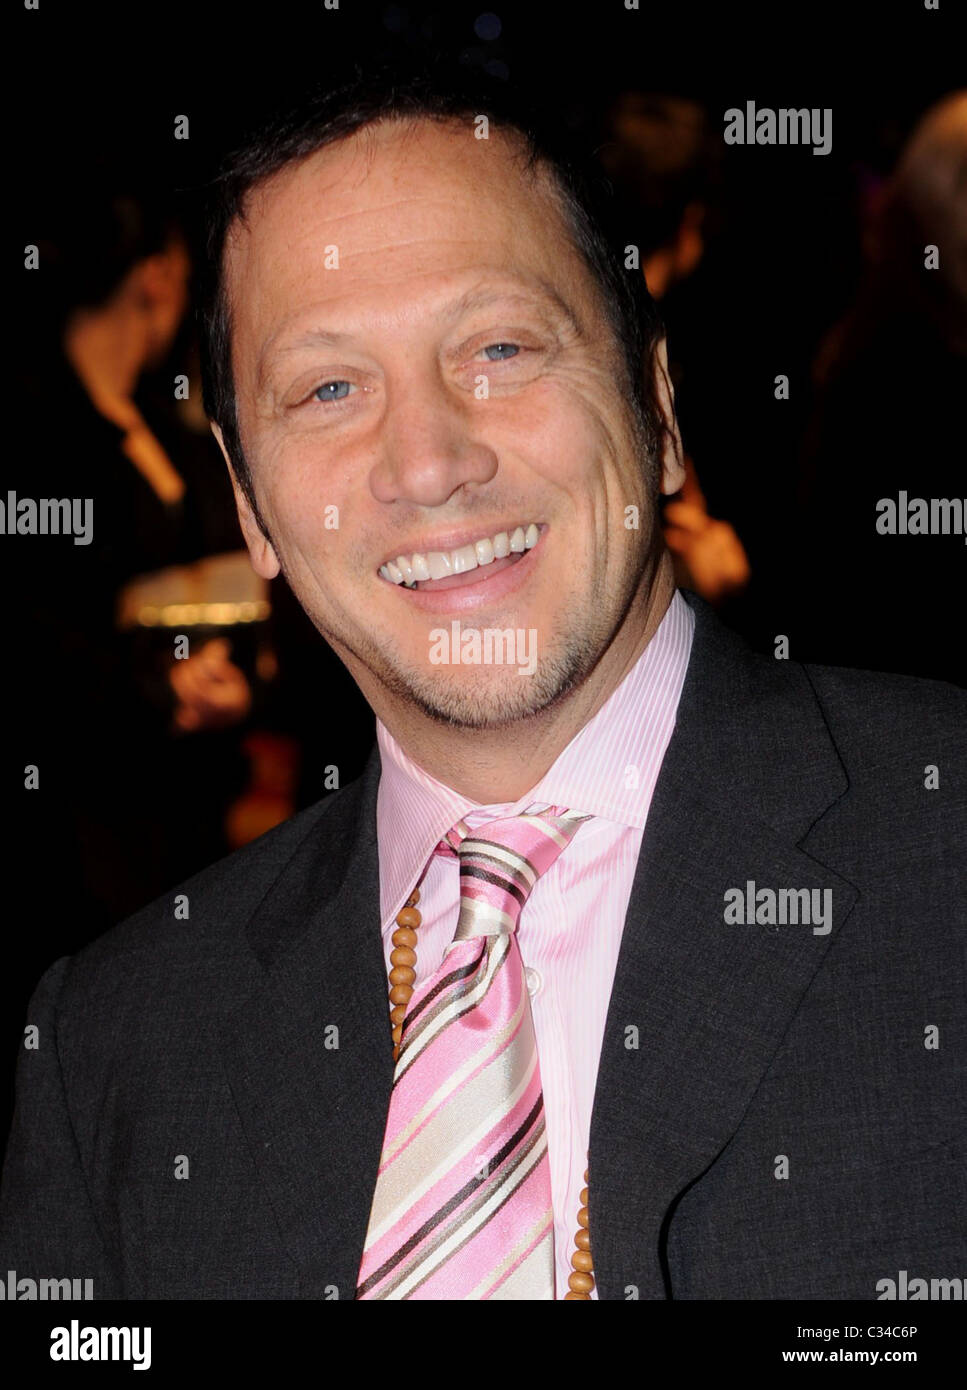 Rob Schneider UK Premiere of 'Bedtime Stories' held at the Odeon Kensington - Arrivals London, England - 11.12.08 Stock Photo